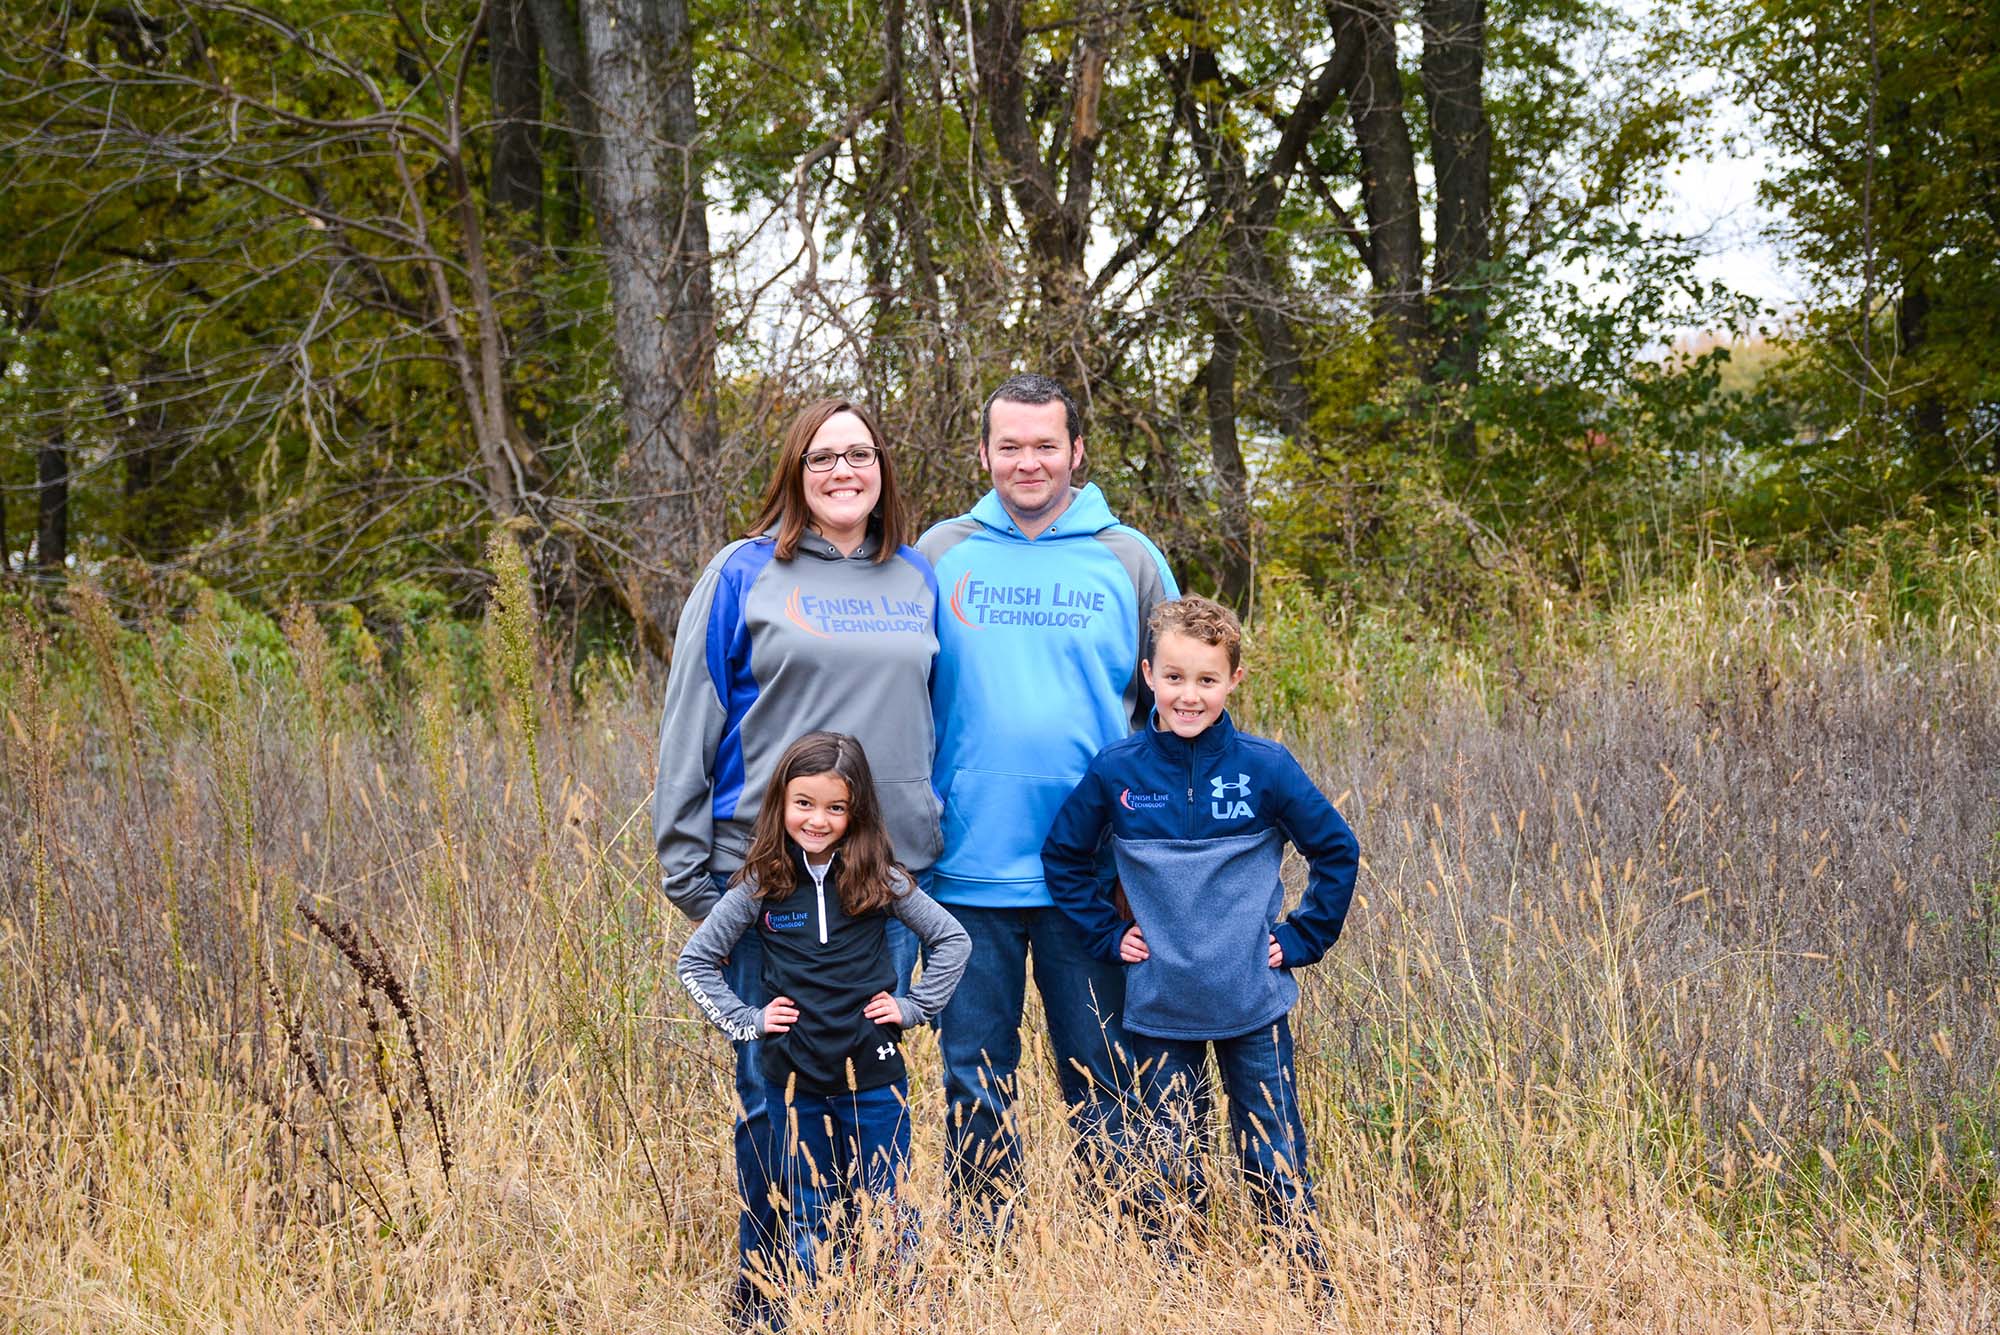 family wearing finish line technology sweatshirts, standing in tall grass